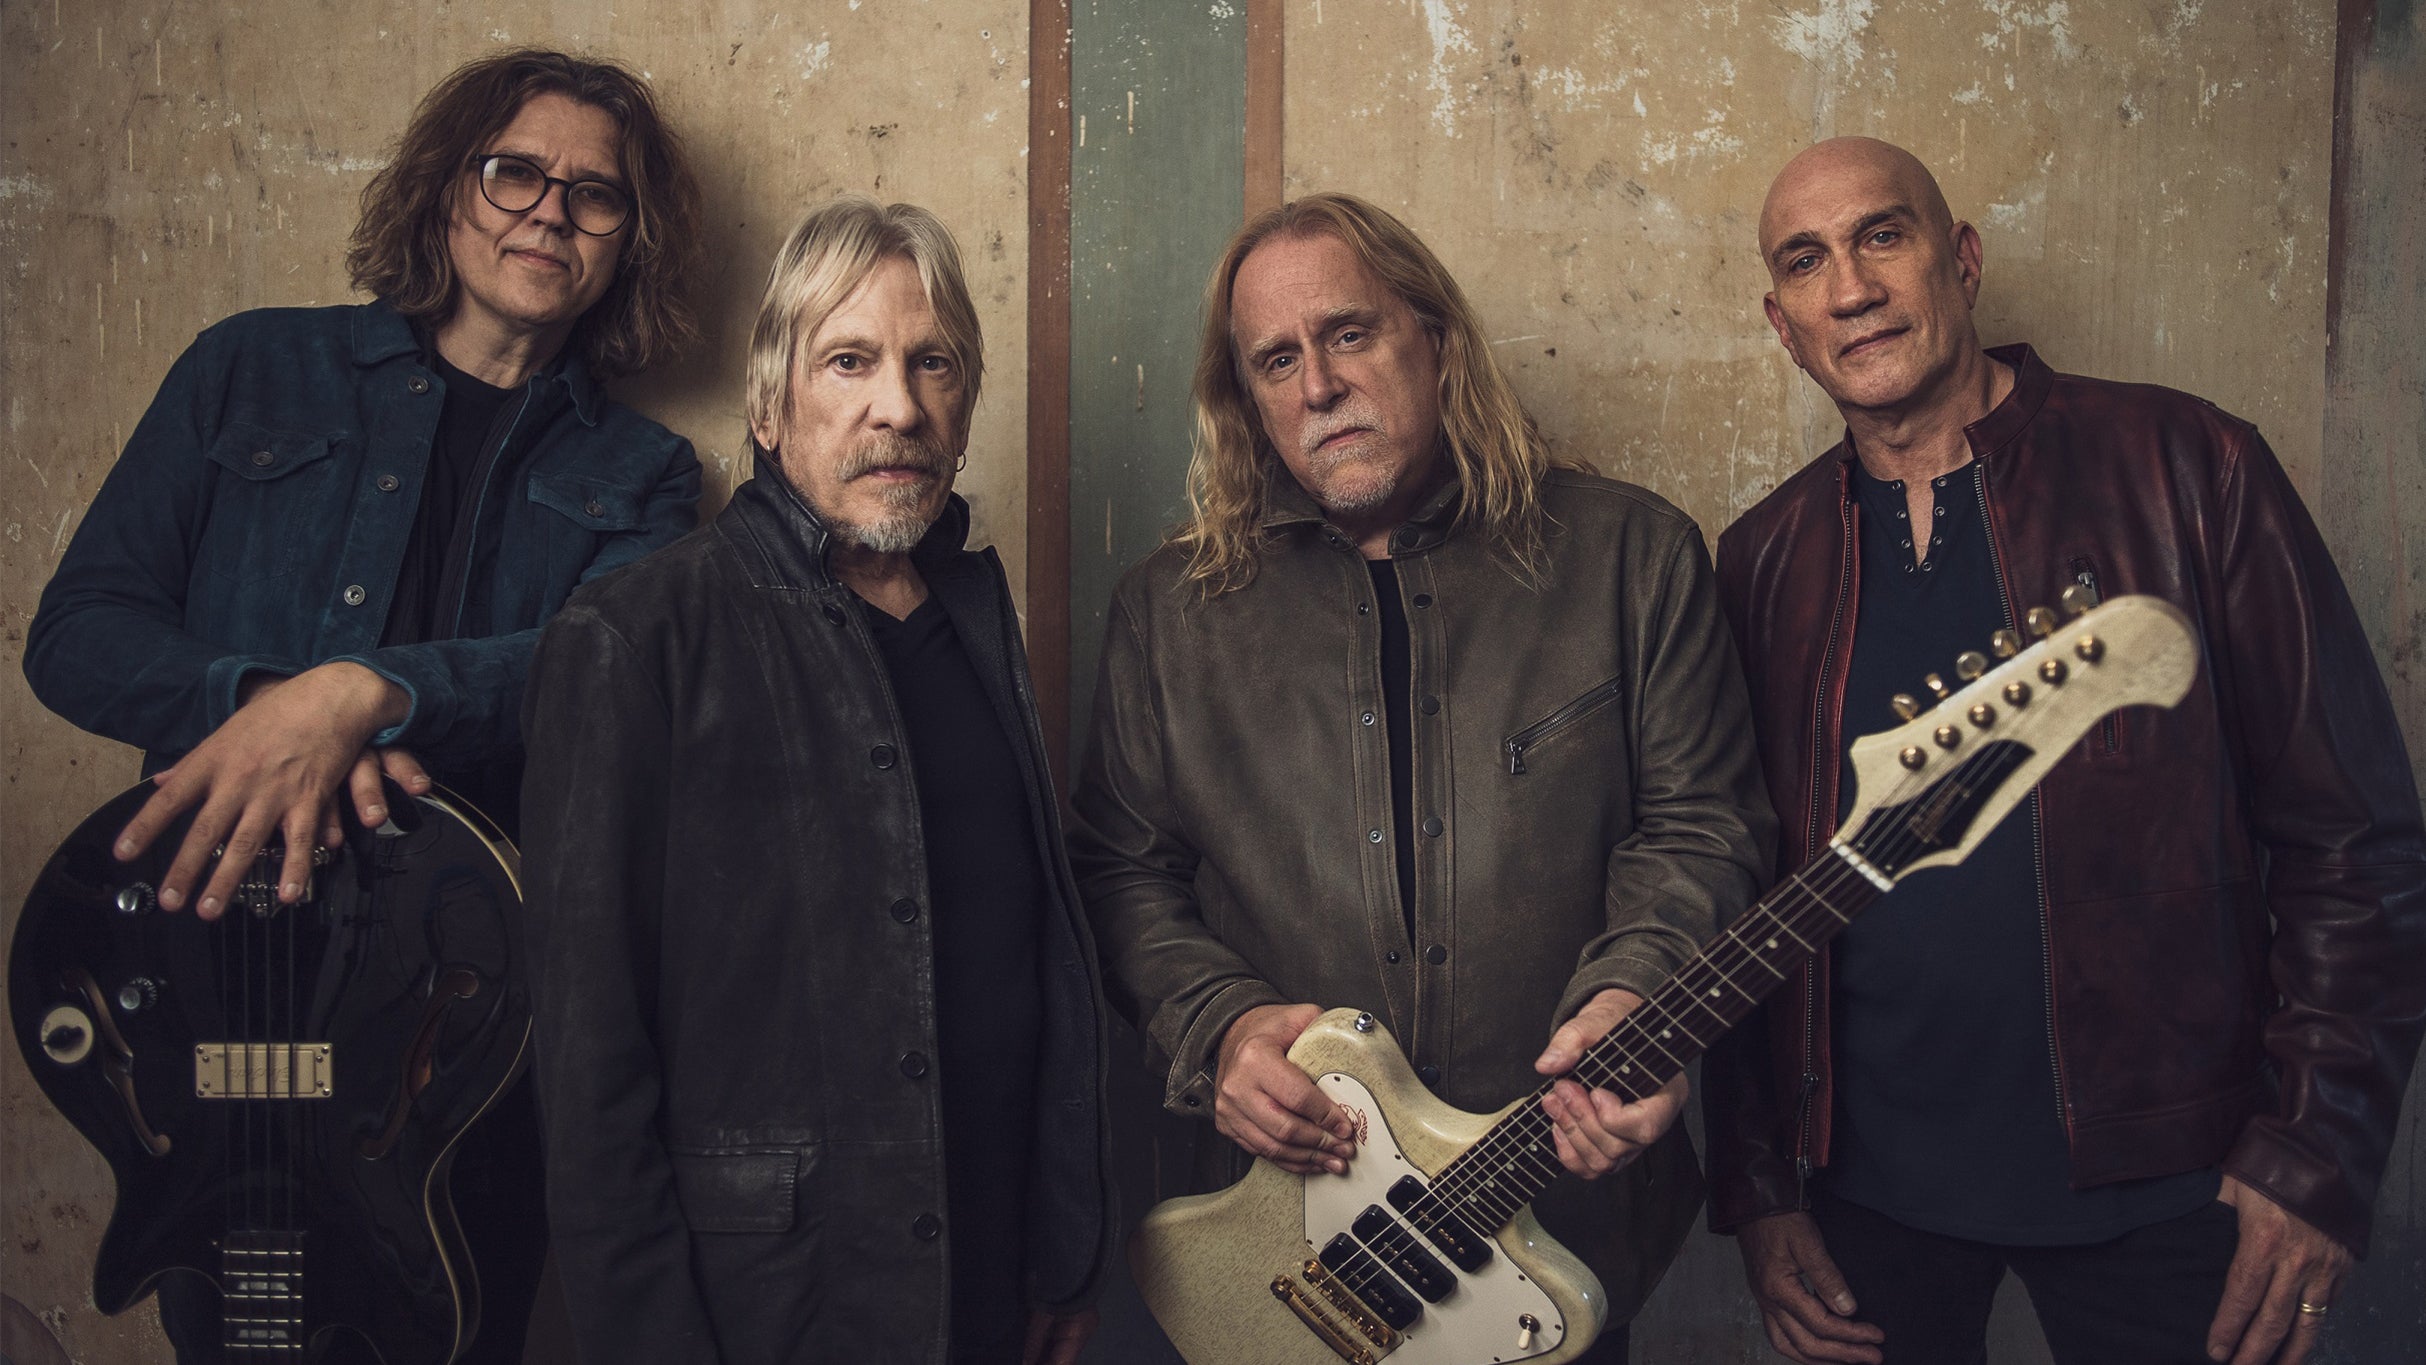 Gov't Mule free presale code for early tickets in Houston